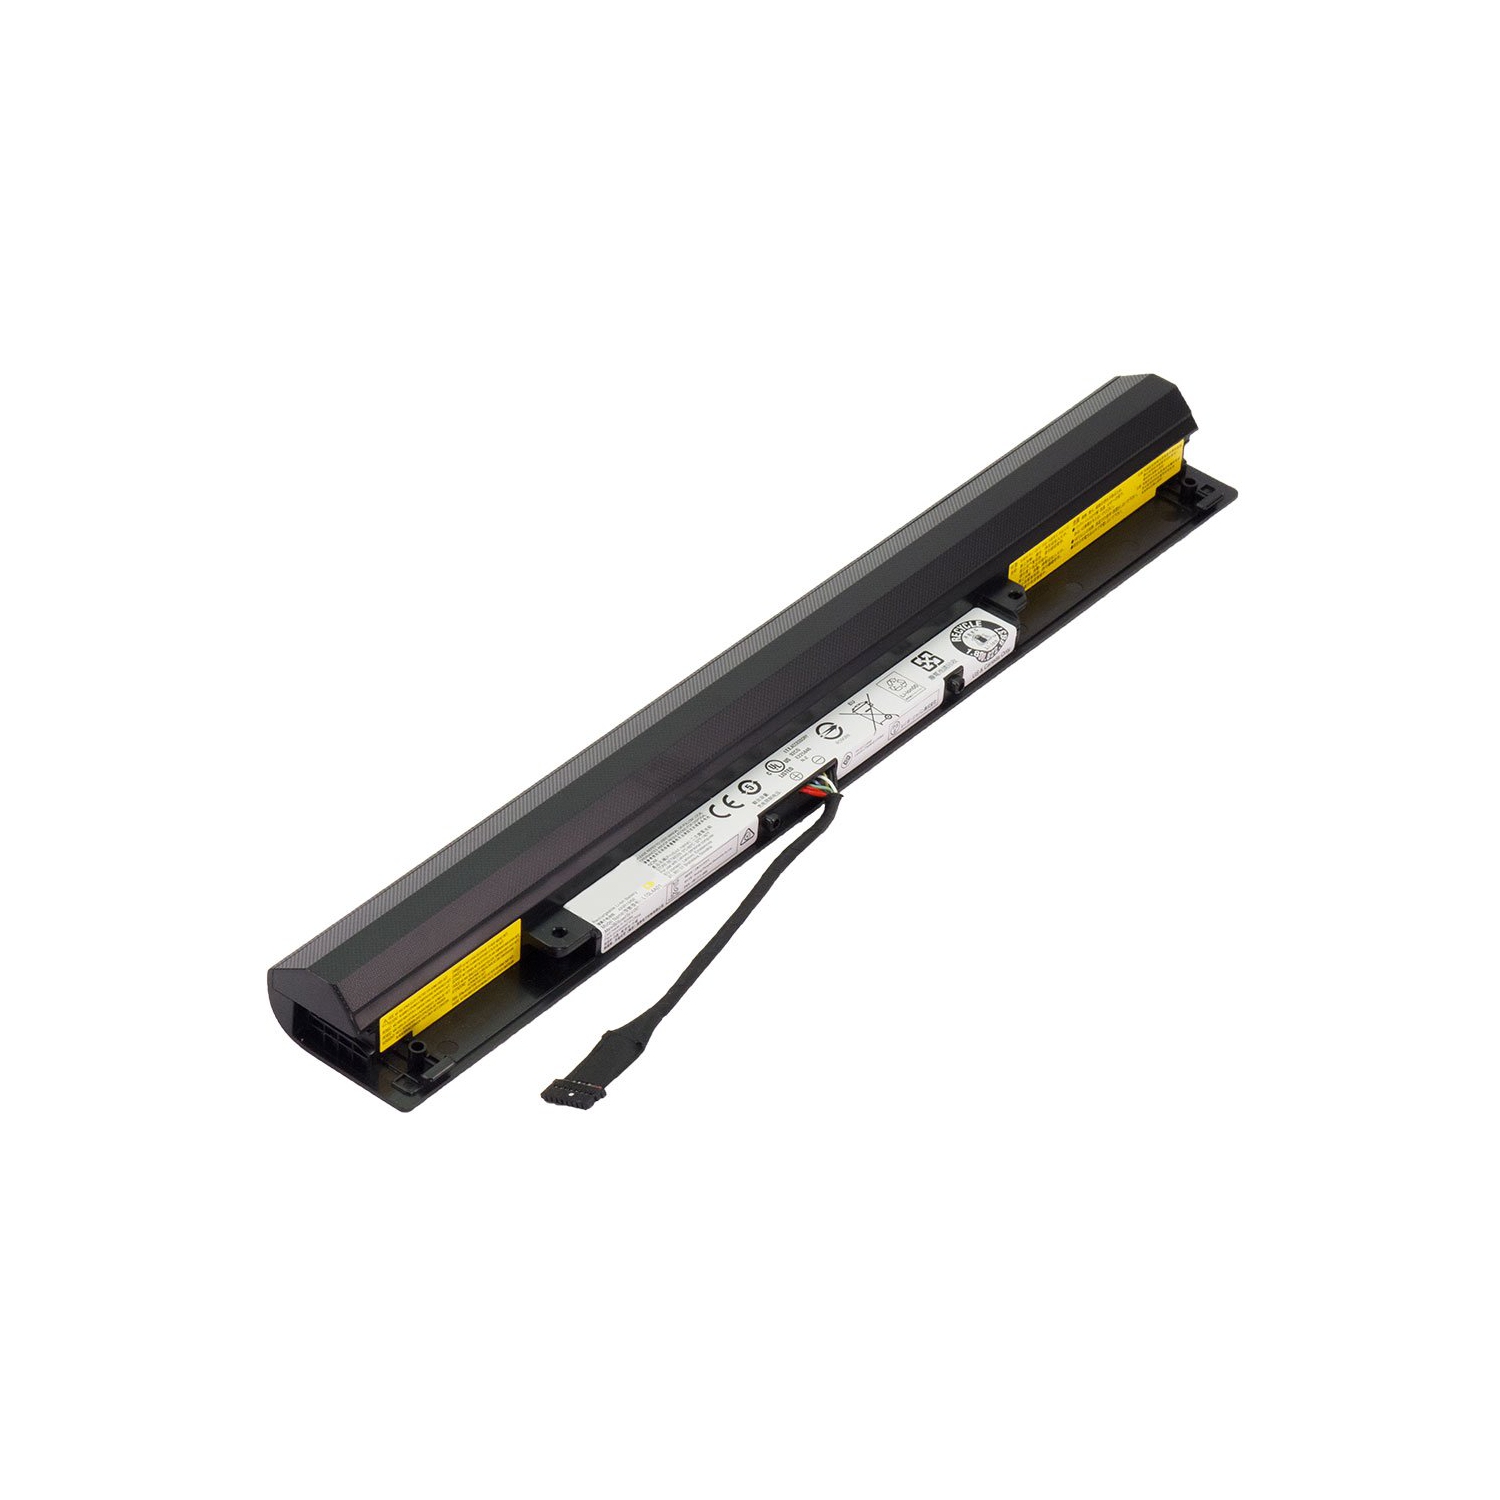 Laptop Battery Replacement for Lenovo IdeaPad 100-15IBD 80QQ003BGE, 41NR19/65, L15L4A01